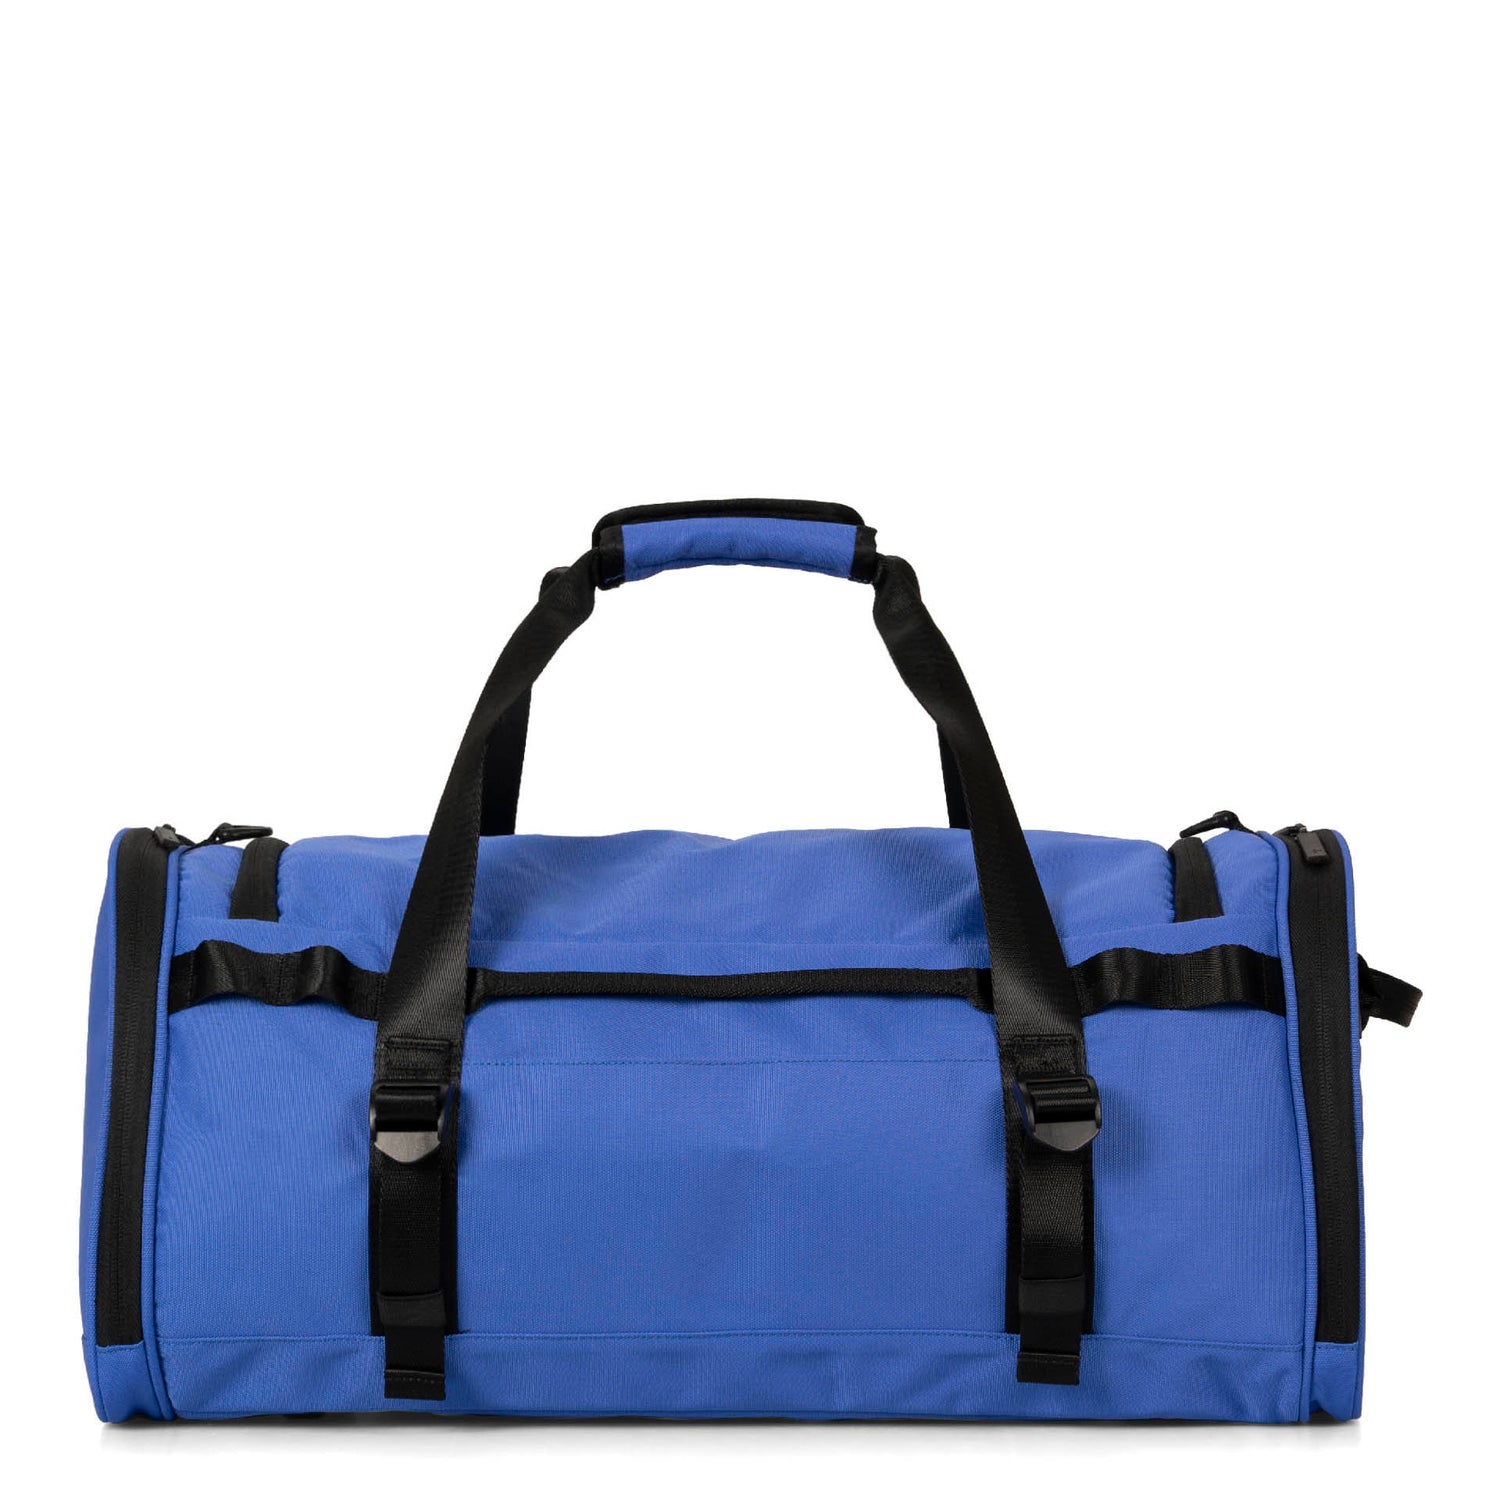 Back side of a blue duffle bag called Banff designed by Tracker showing its top handles, front tracker logo, and multiple zippers.